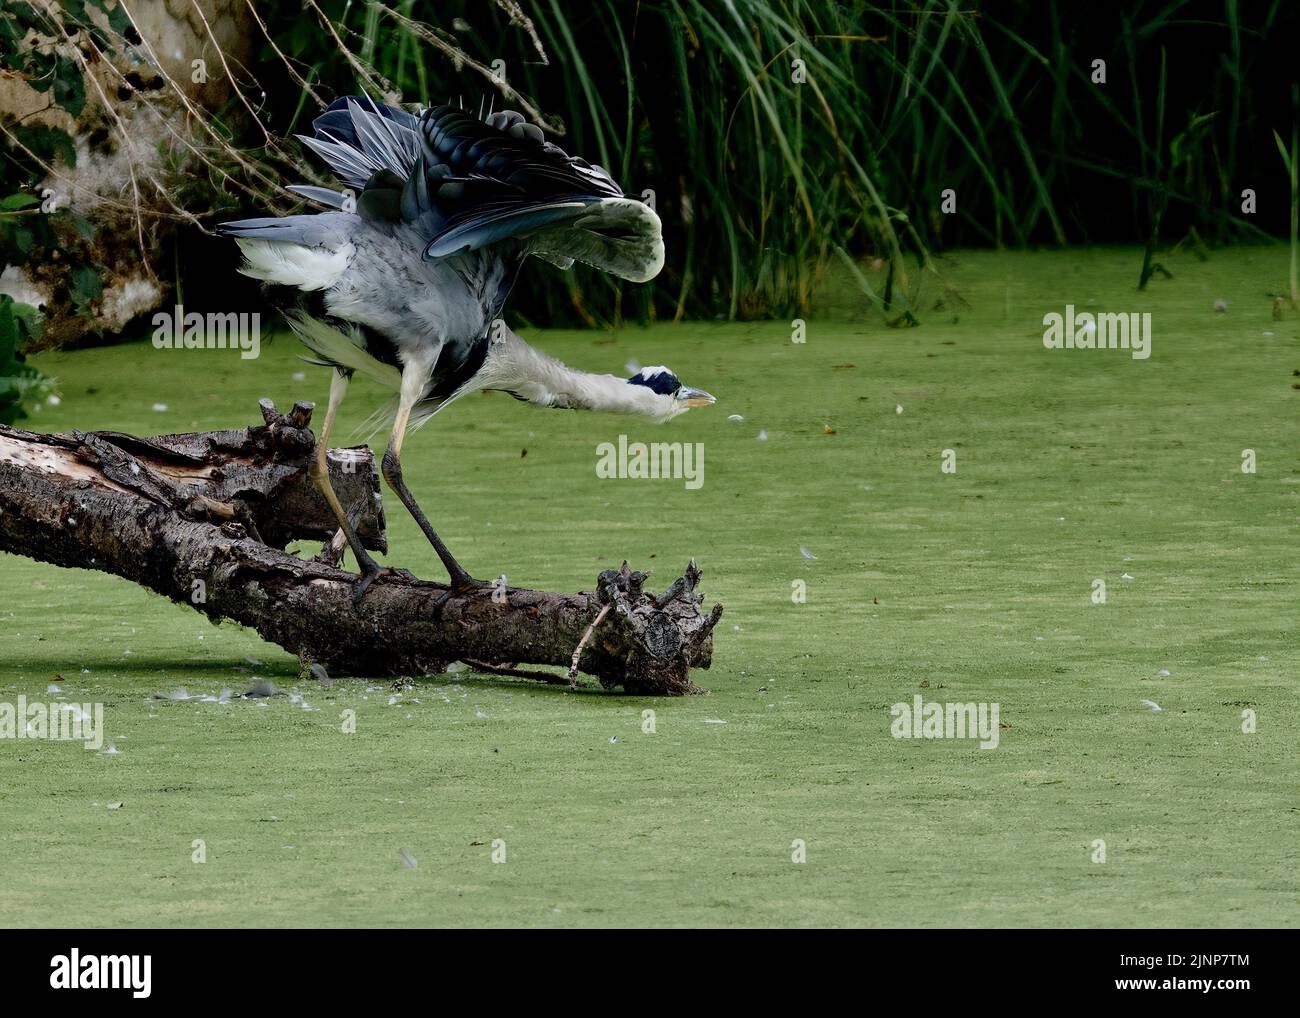 Grey Heron (Ardea cinerea) outstretched about to fly. Stock Photo